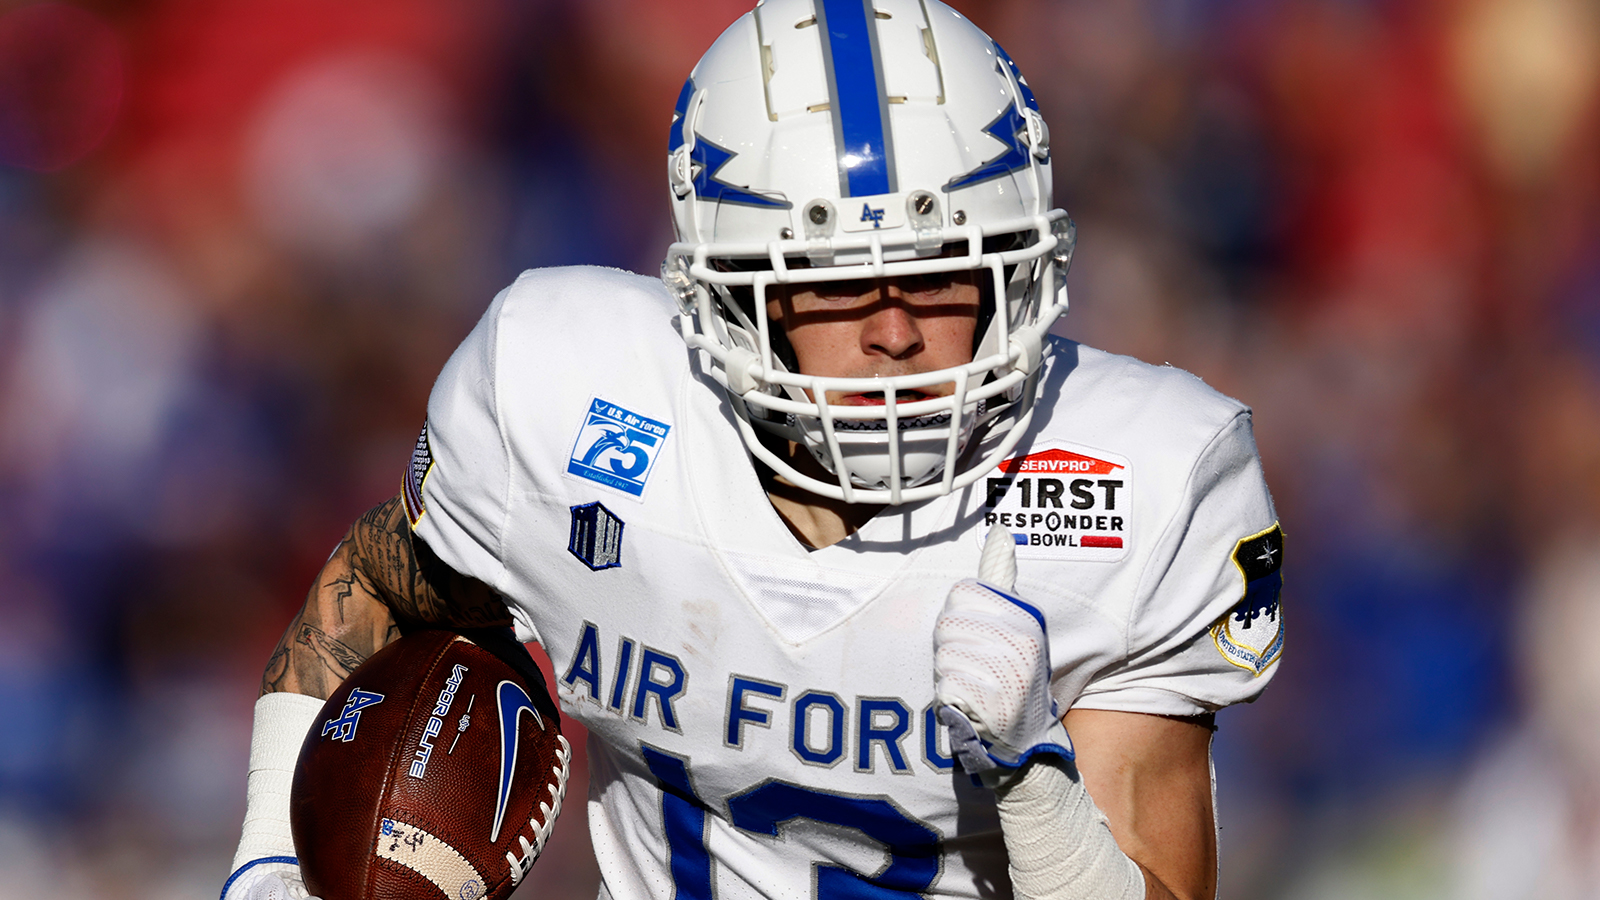 Air Force References Bombing Japan In Football Jersey Reveal